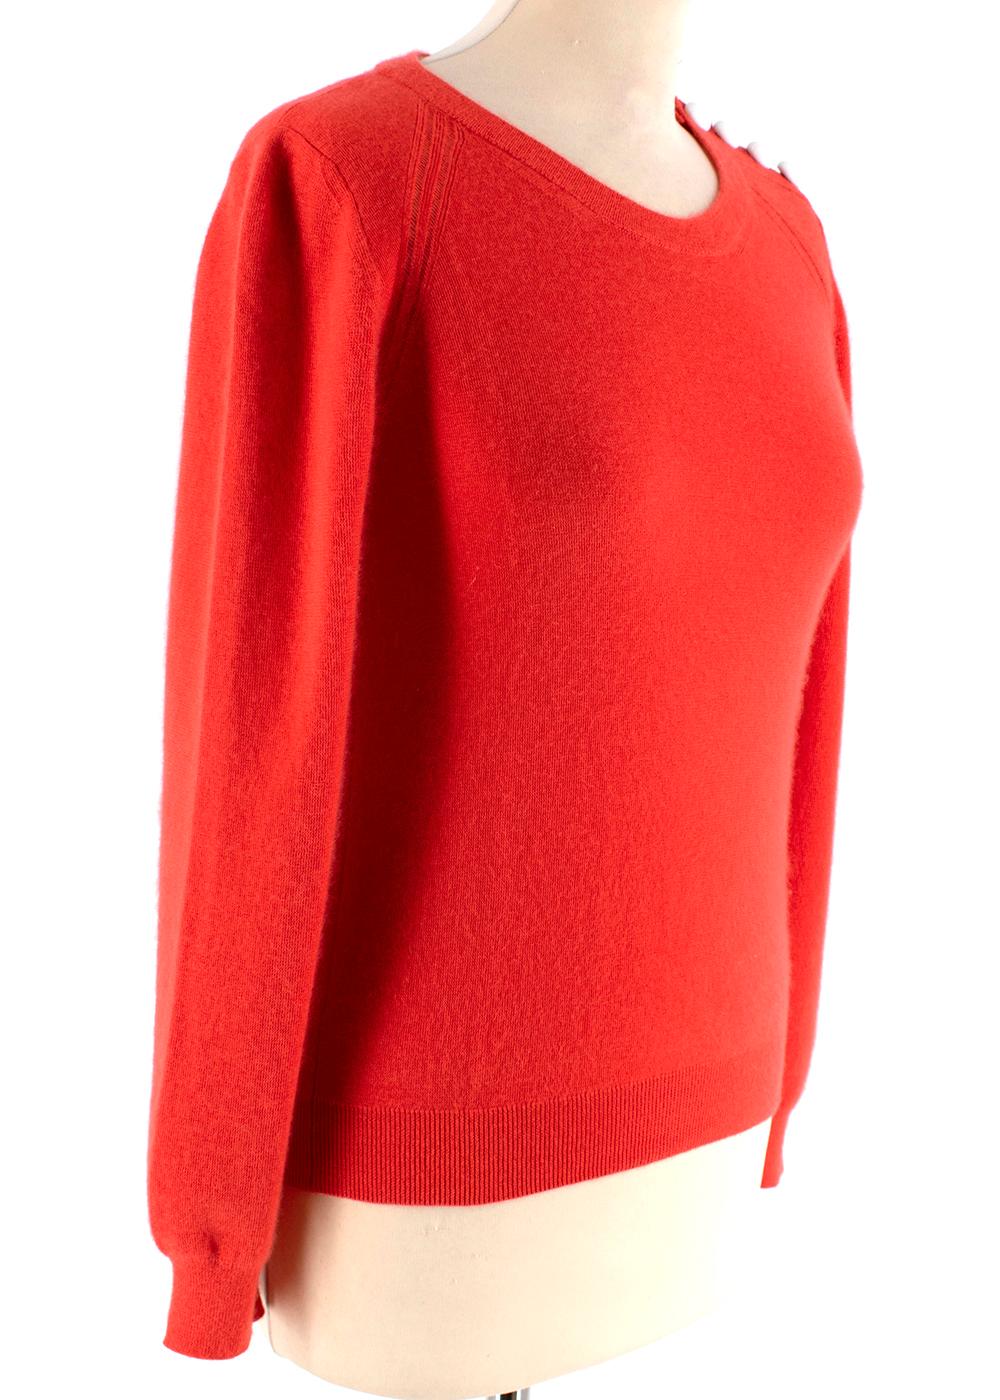 Louis Vuitton Coral Long-Sleeve Buttoned Jumper

- Soft cashmere blend 
- Coral pink knit 
- Long sleeves
- Ribbed neckline, sleeves and hem 
- Stitched LV emblem on lower body
- White contrast button fastening on shoulder 

THERE IS NO CARE LABEL,